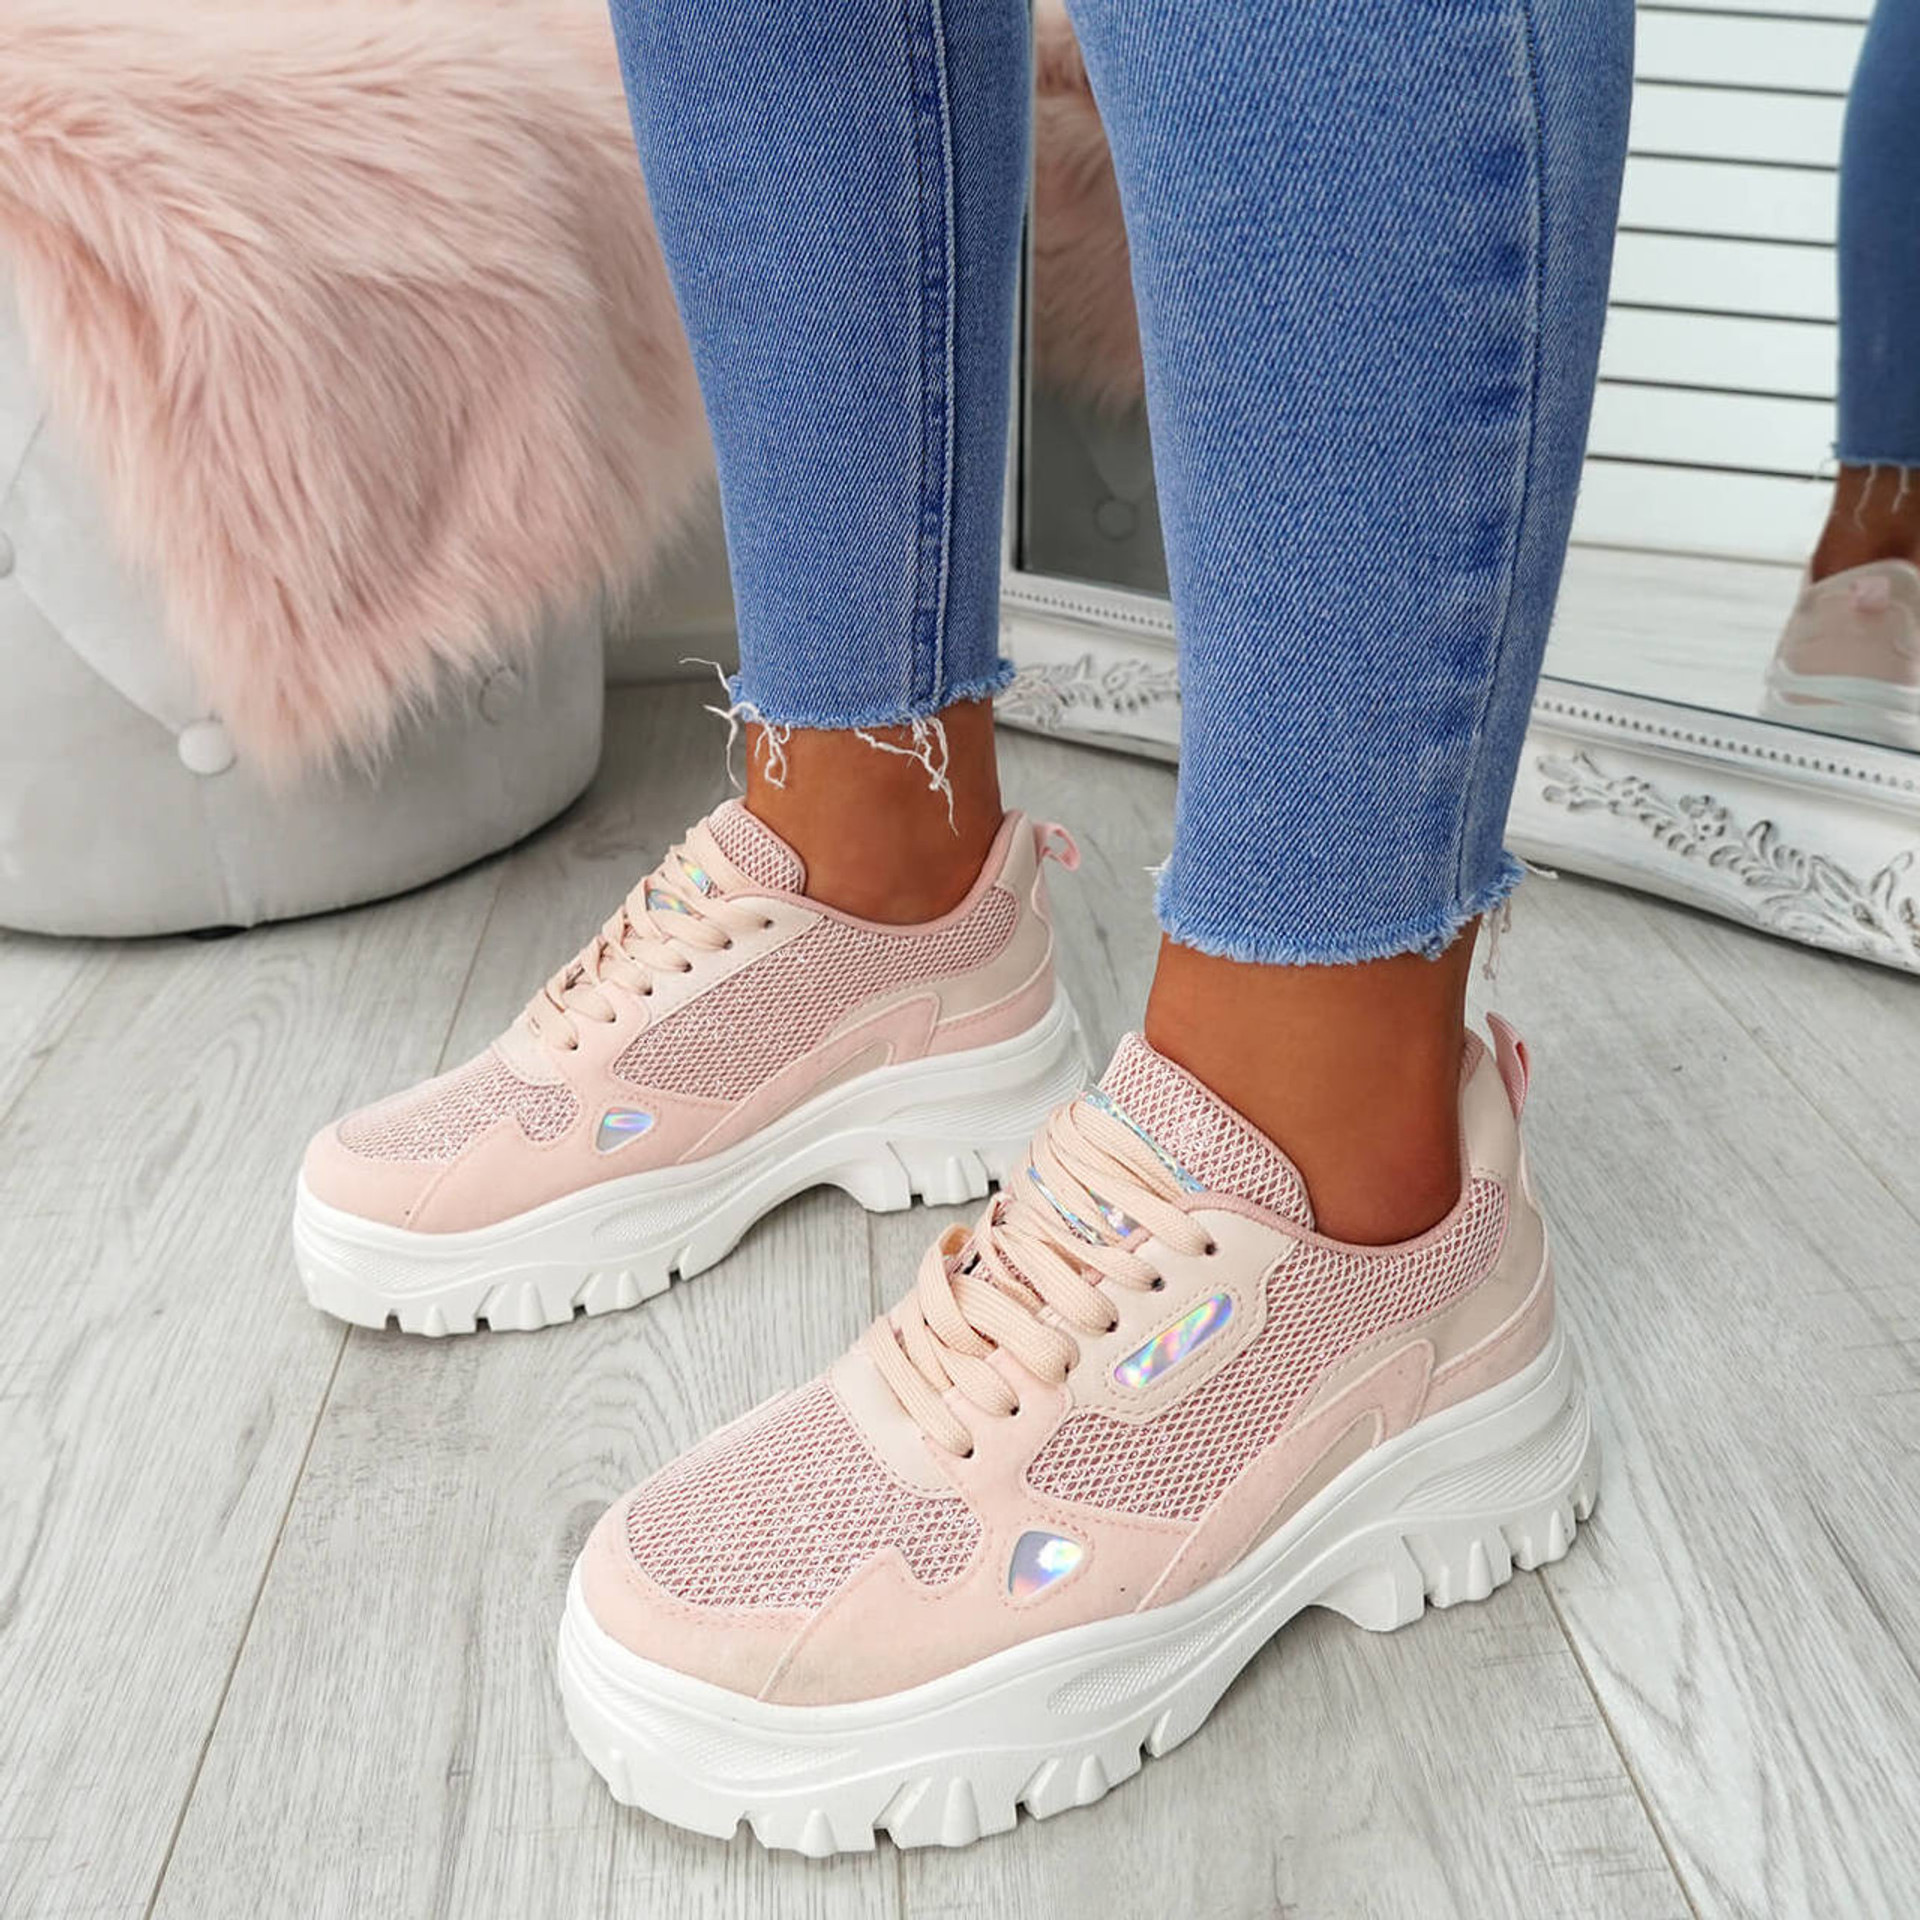 womens pink lace-up chunky trainers sneakers size uk 3 4 5 6 7 8 